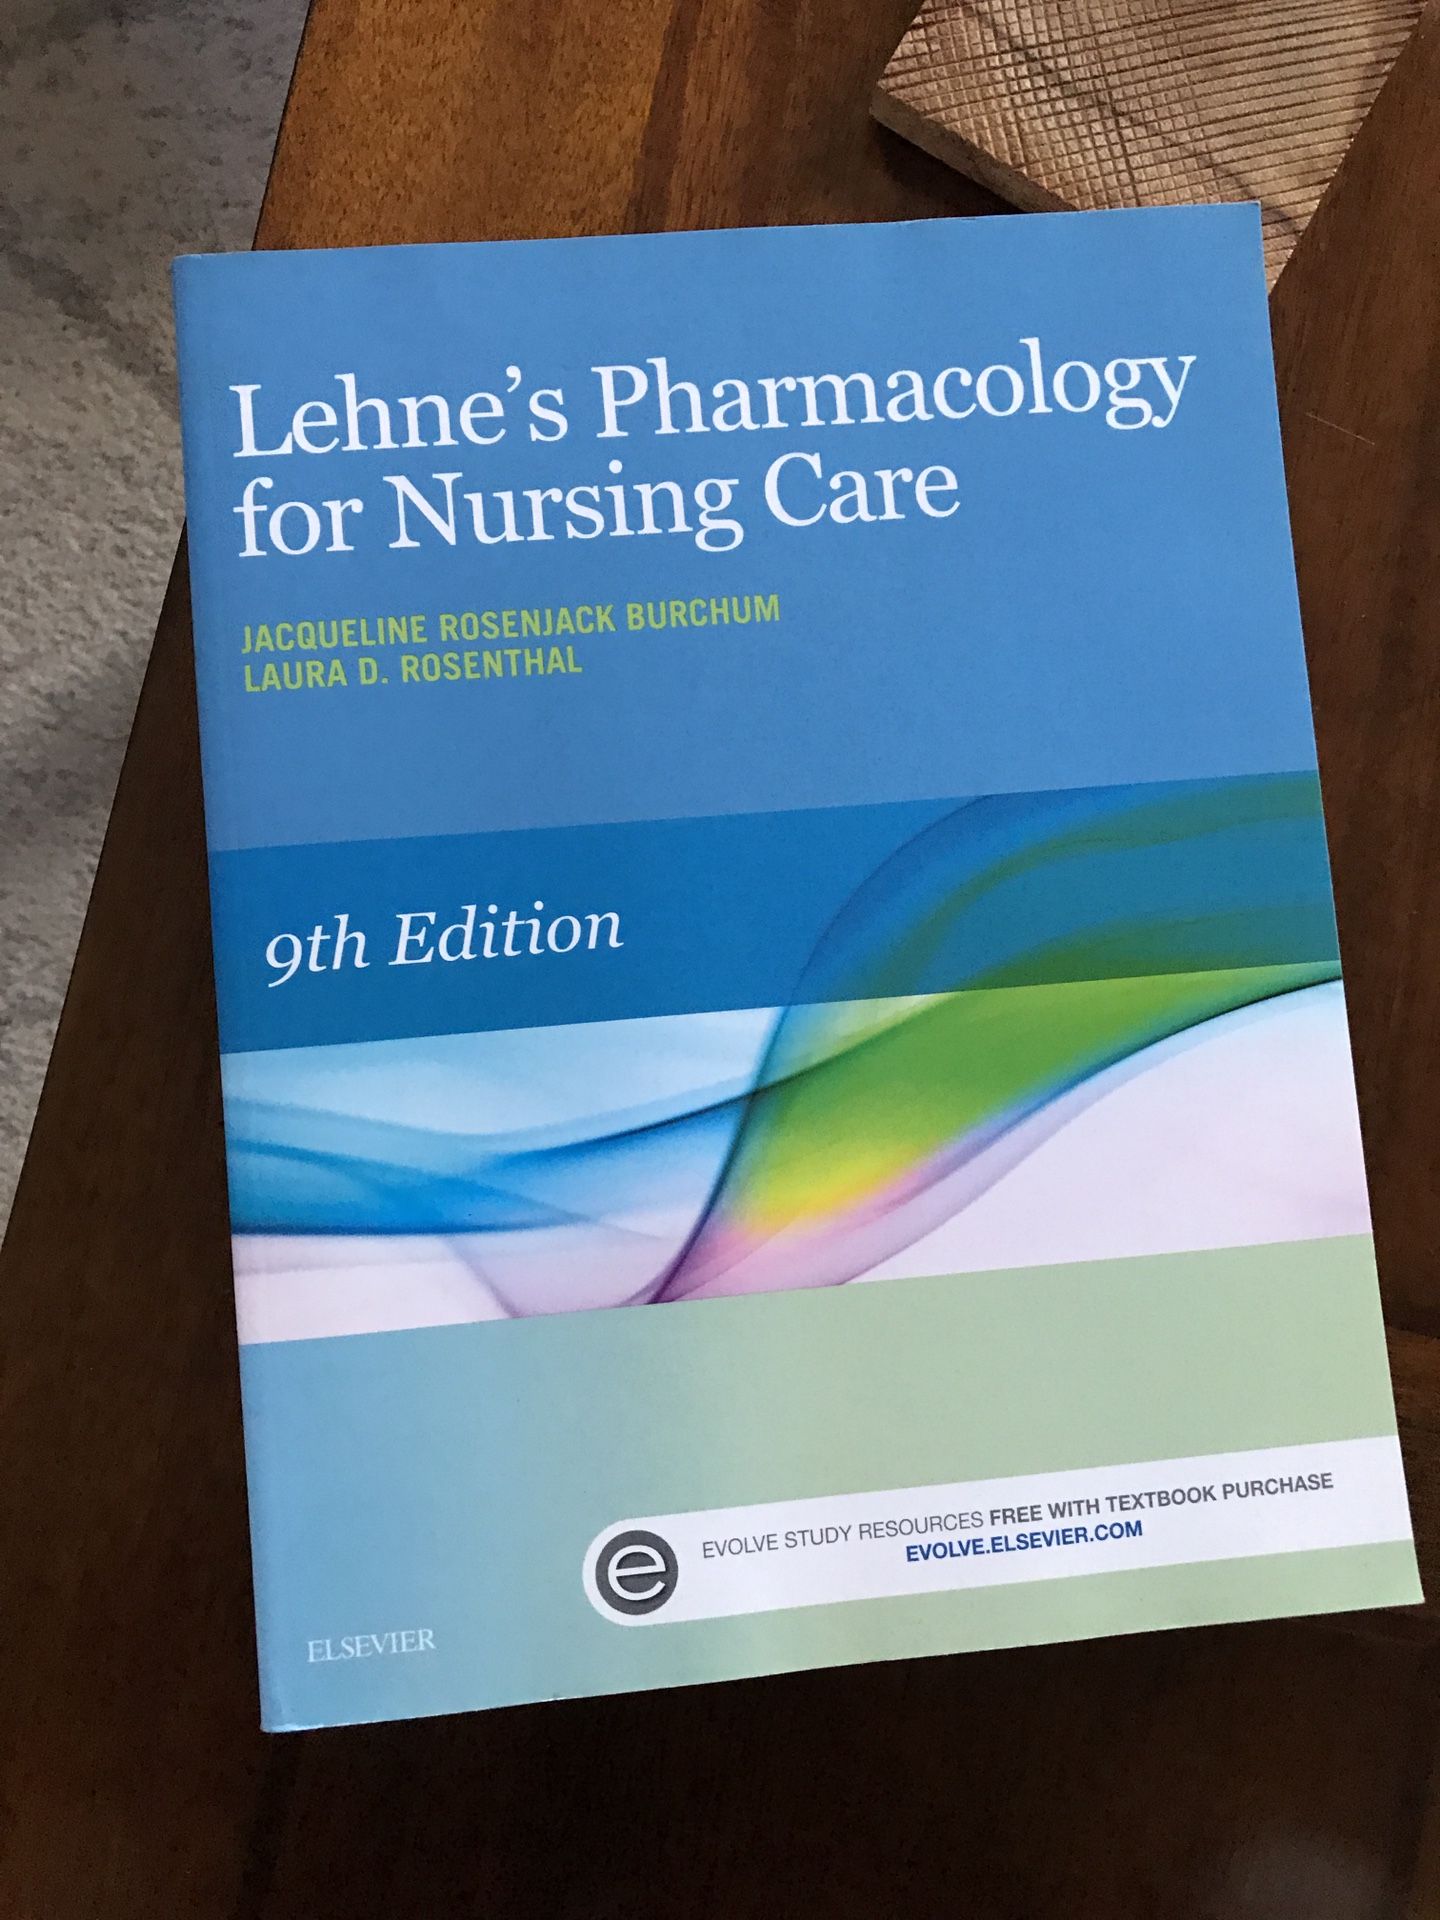 Lehne’s Pharmacology for Nursing Care 9th Edition